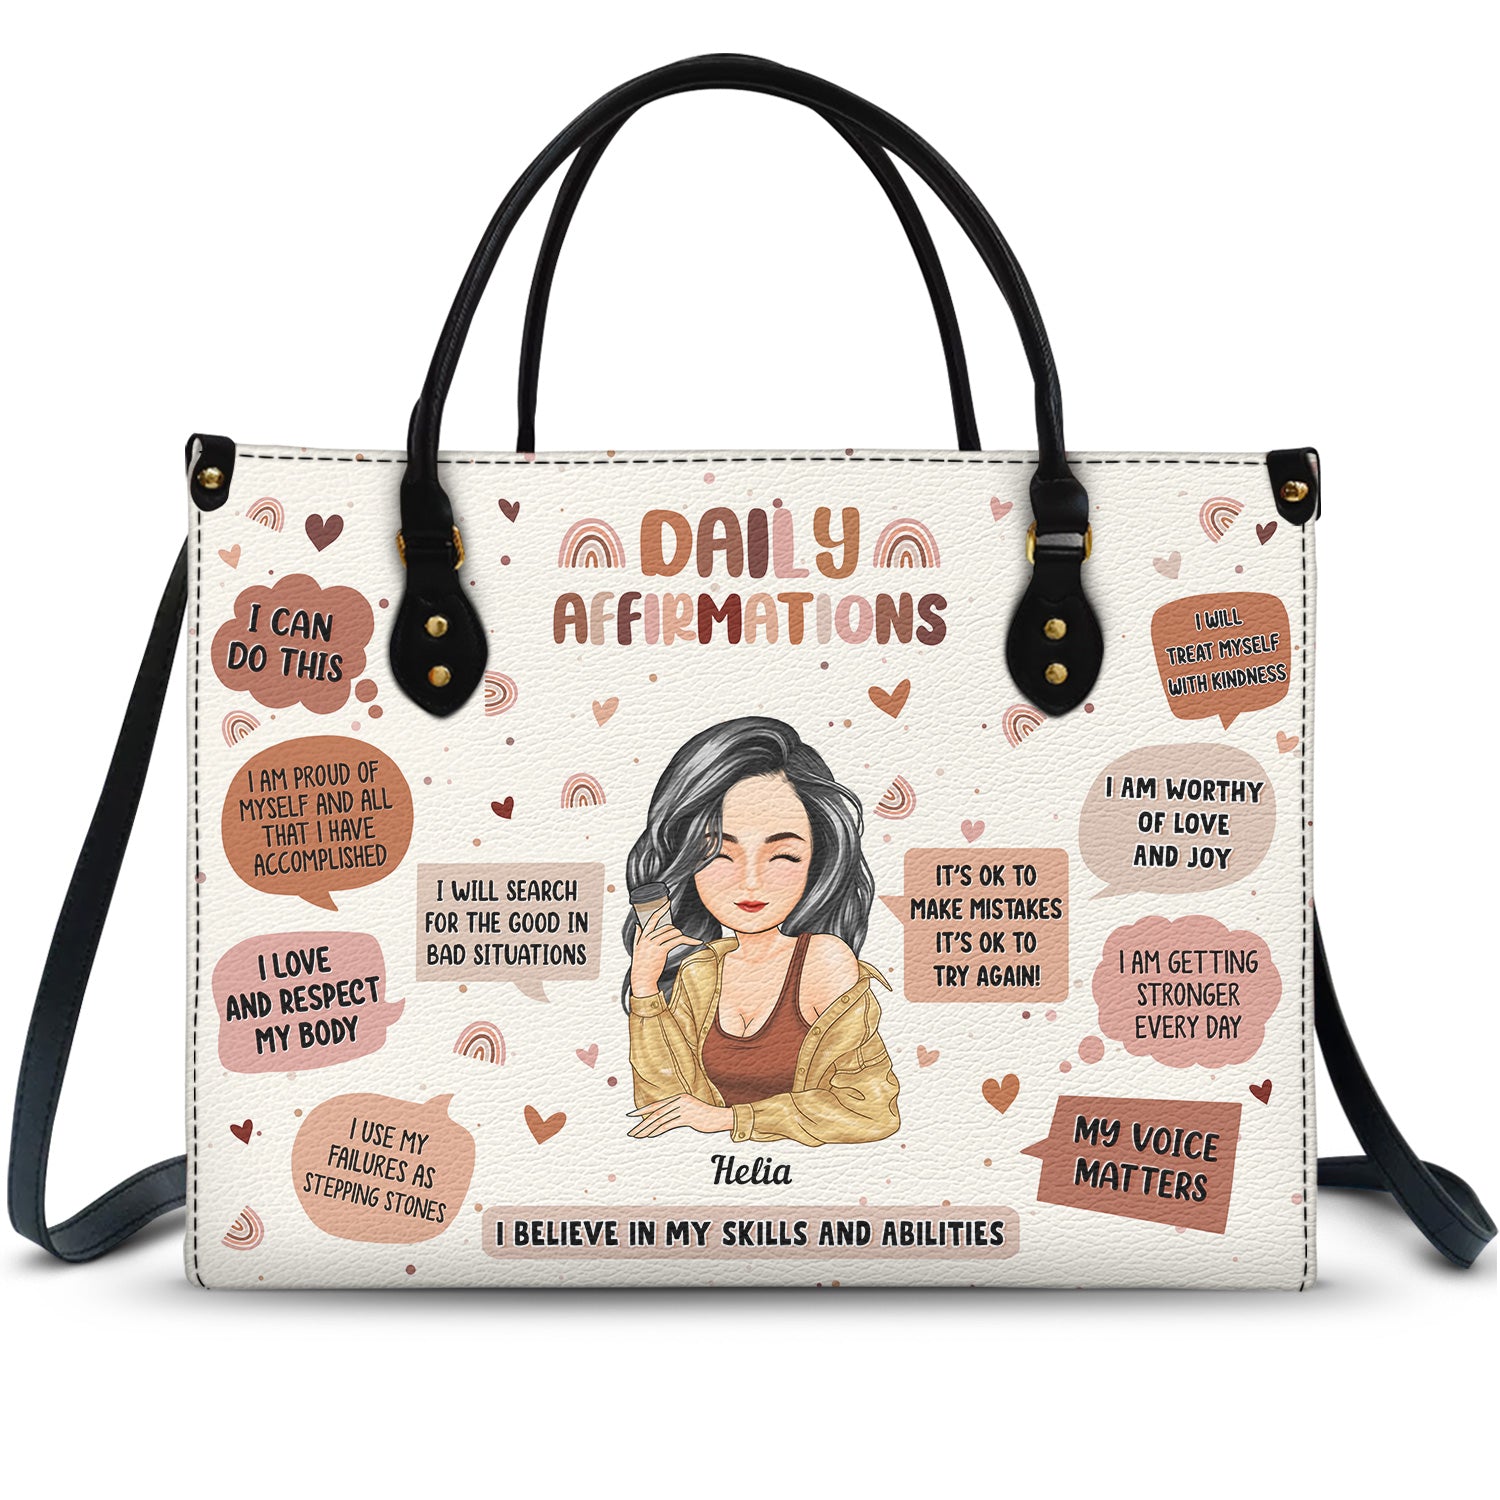 Daily Affirmations - Gift For Yourself, Girls, Women - Personalized Leather Bag